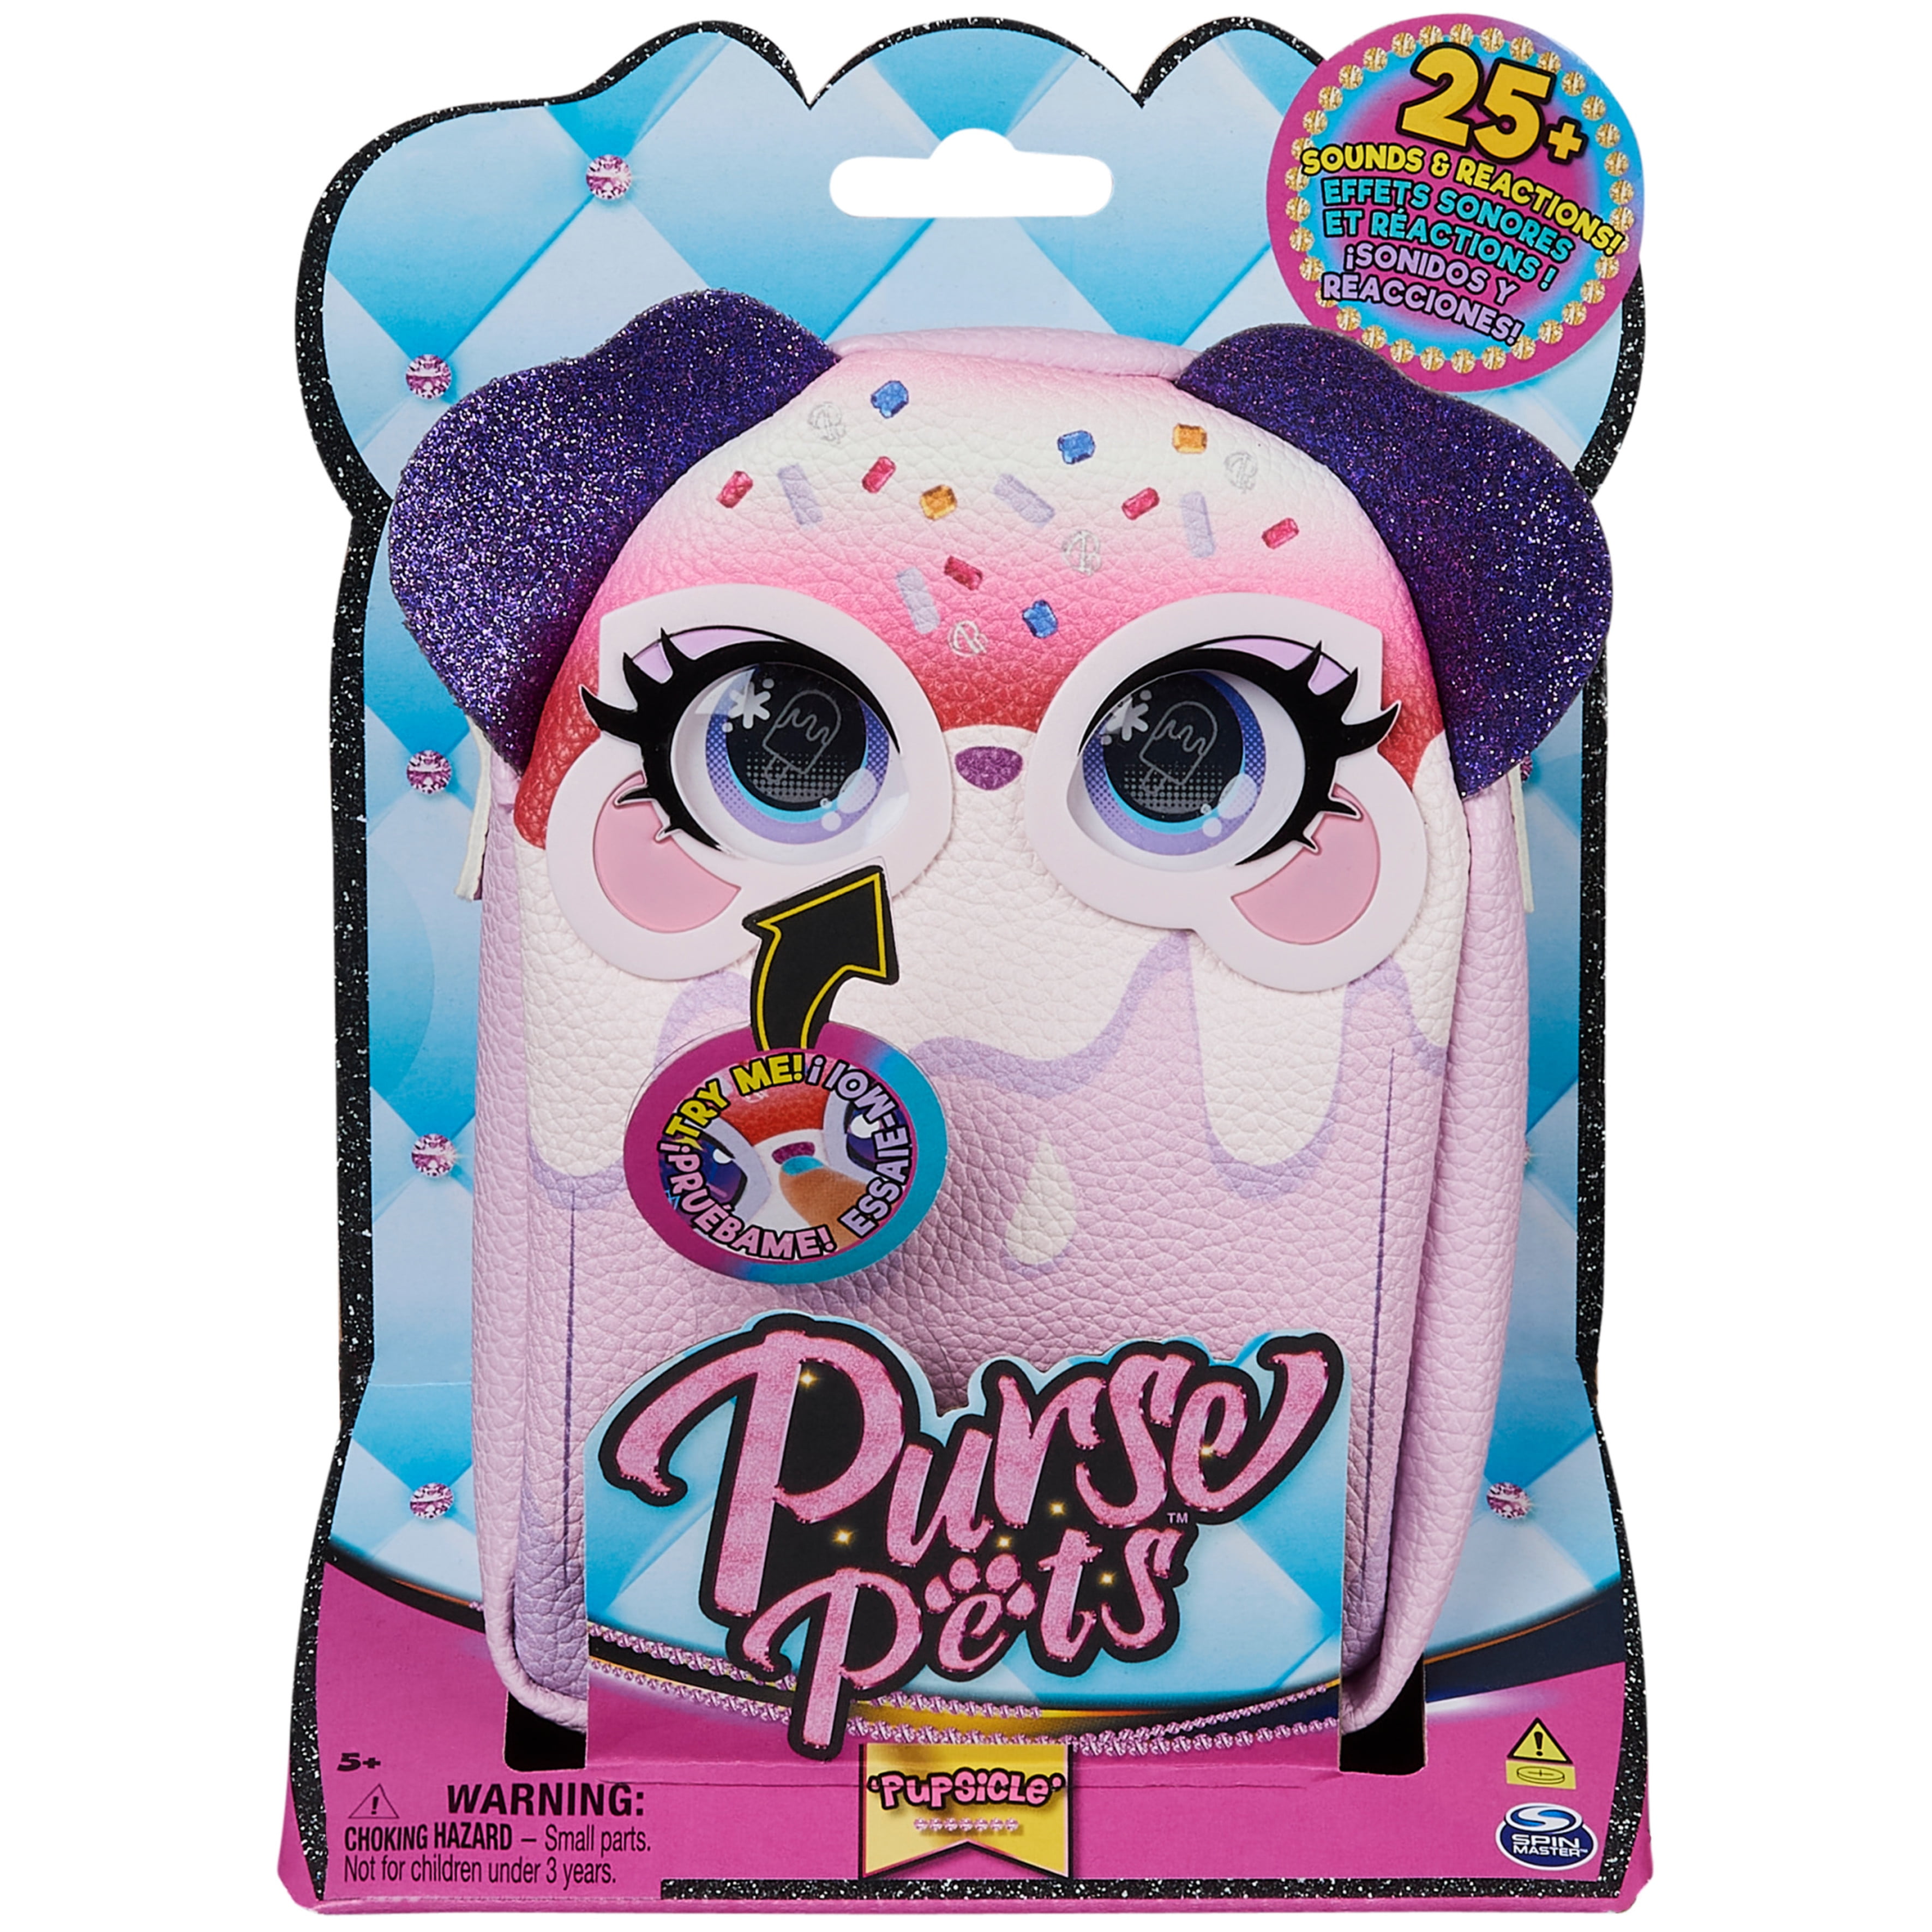 Purse Pets, Pupsicle with Lights and over 25 Sounds & Reactions